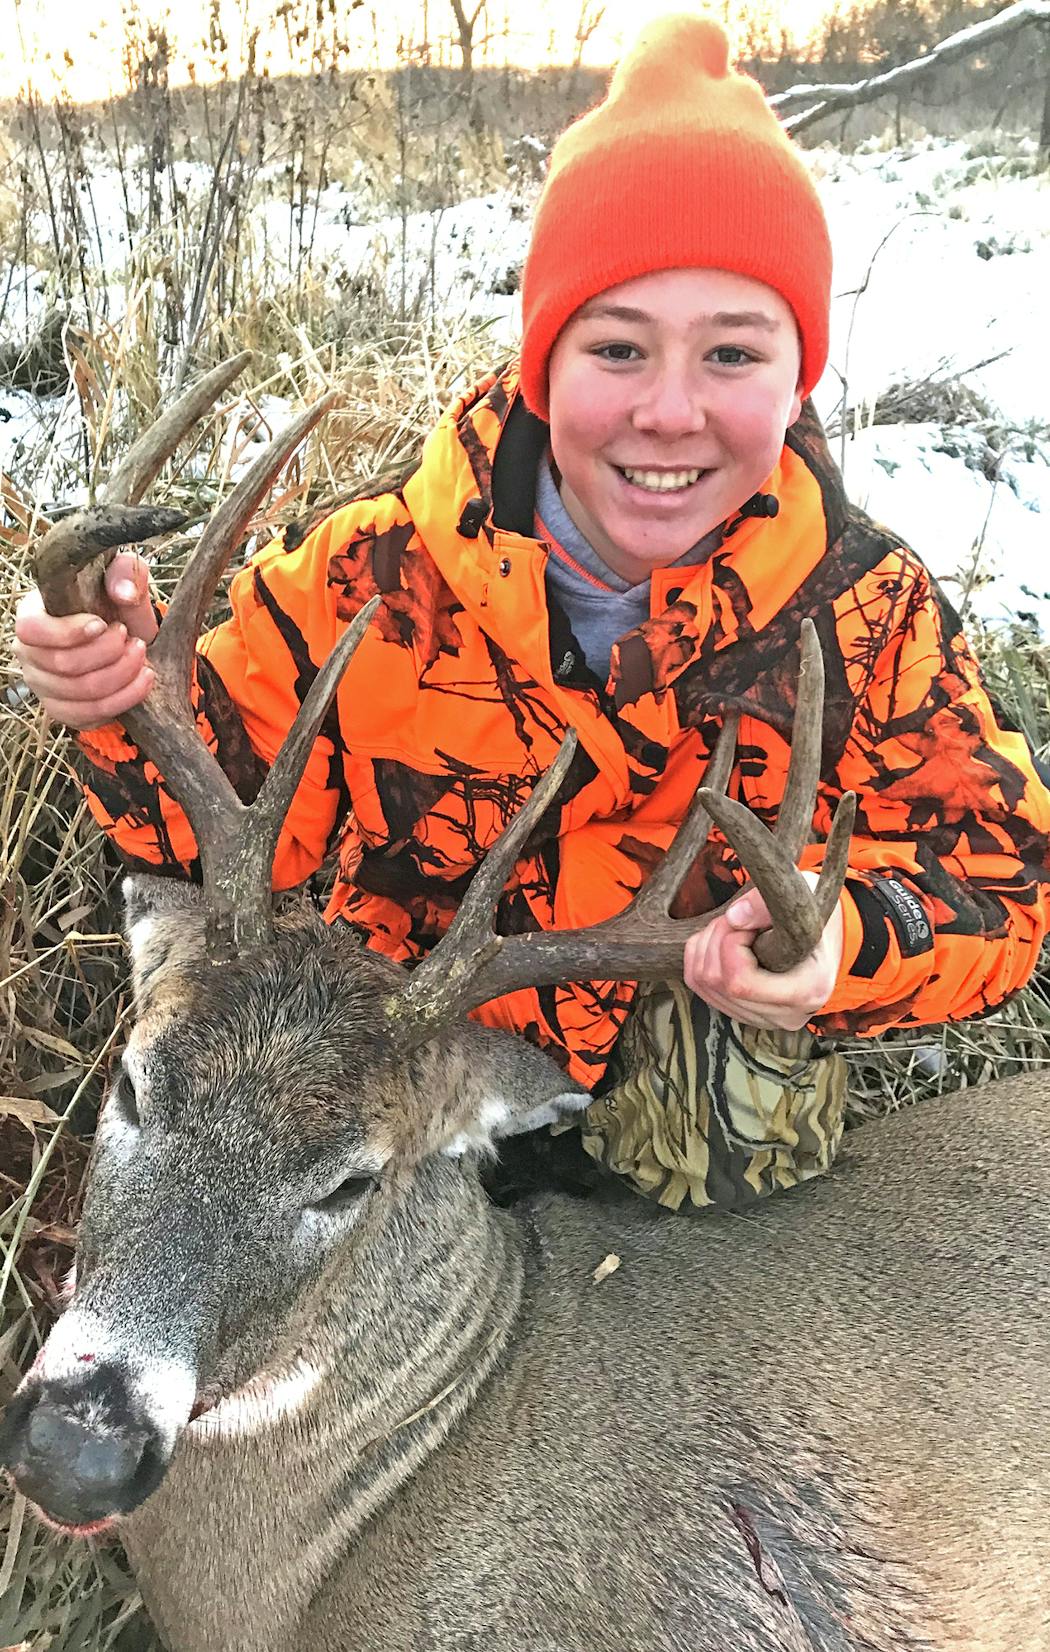 Gavin James Rowe, 14, of Plymouth, harvested his first buck ever, a 10-pointer, on opening morning of the firearms season, then followed up 20 minutes later with his first doe ever, all while hunting with his dad, Steve, on his grandfather James Rowe’s farm in southern Minnesota.